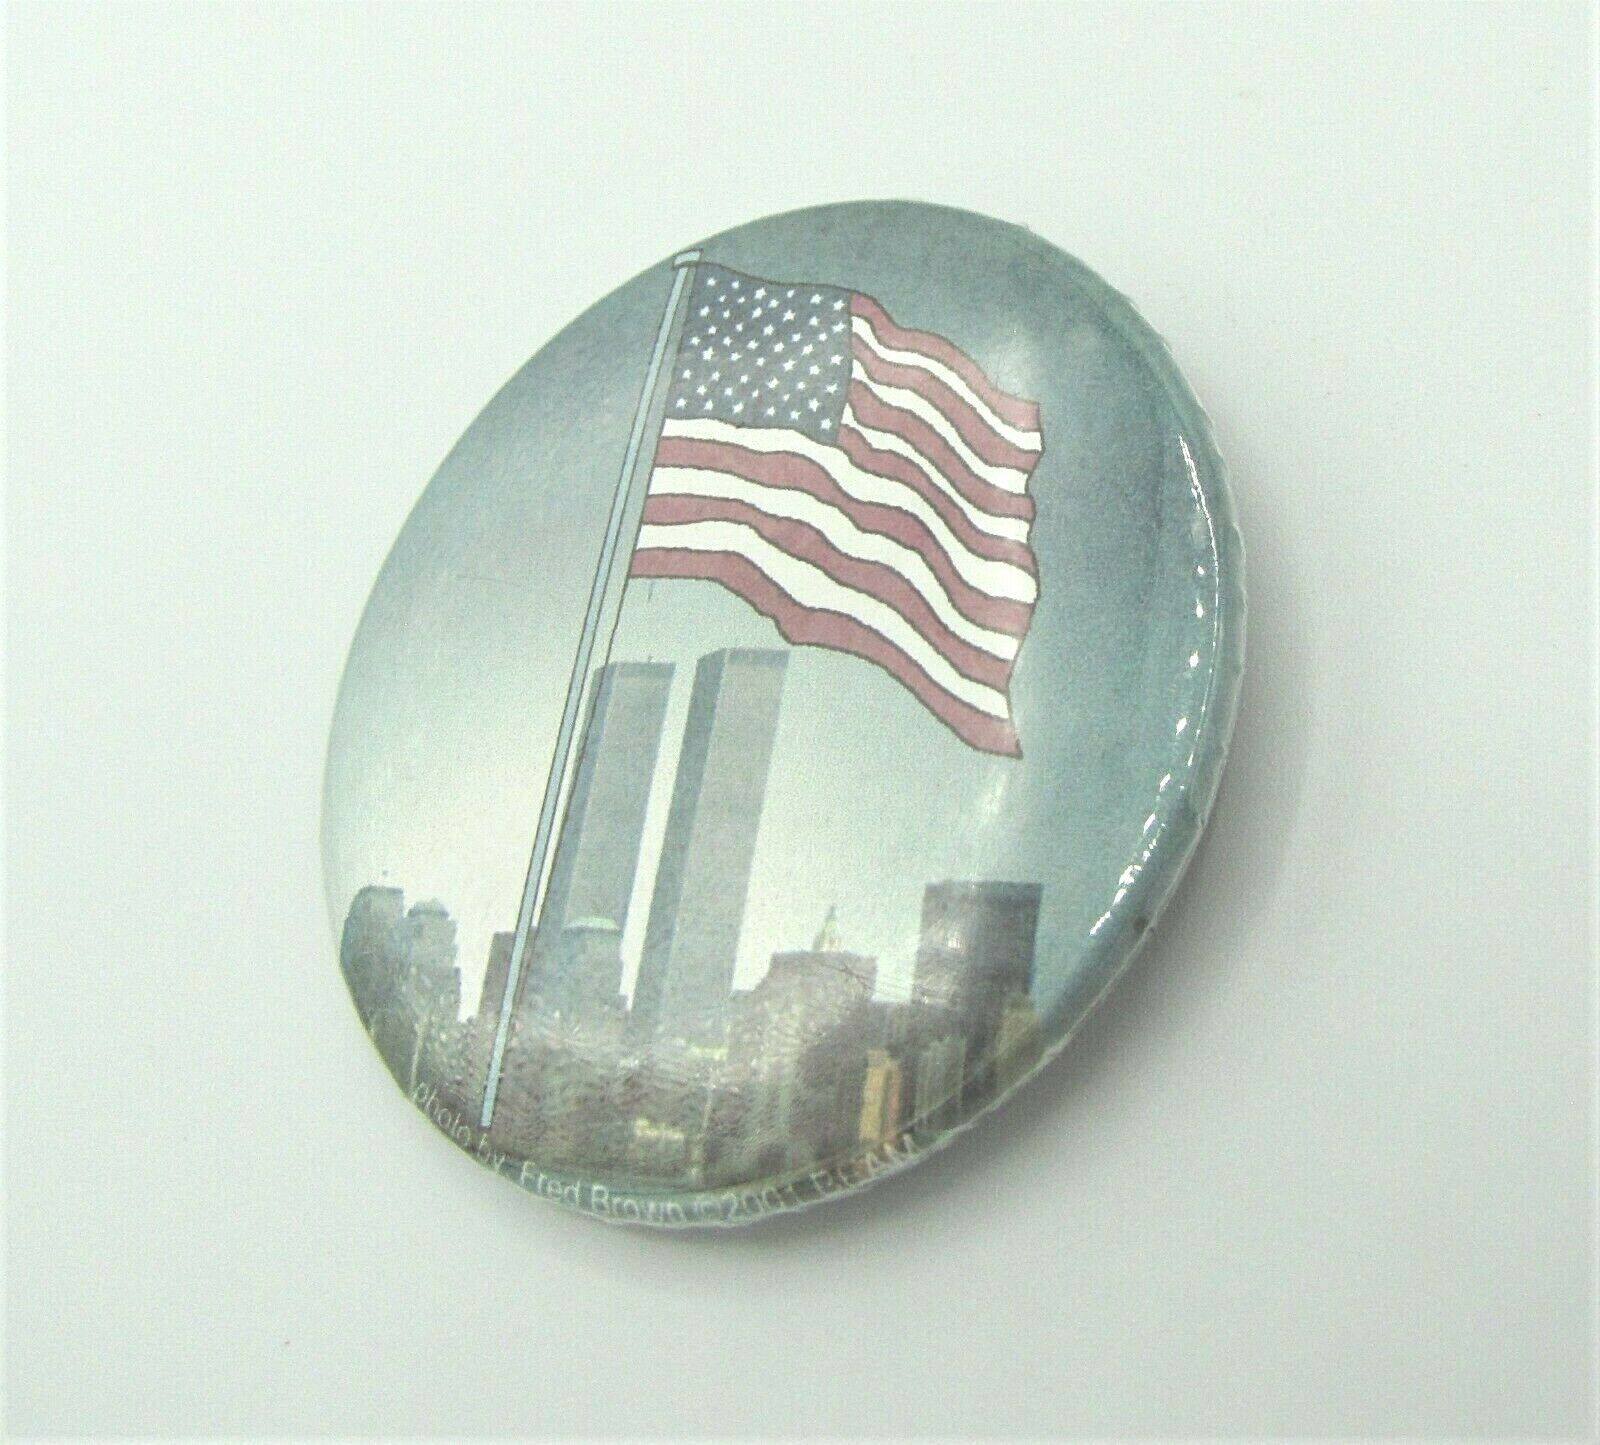 Twin Towers Button 911 Fred Brown 2001